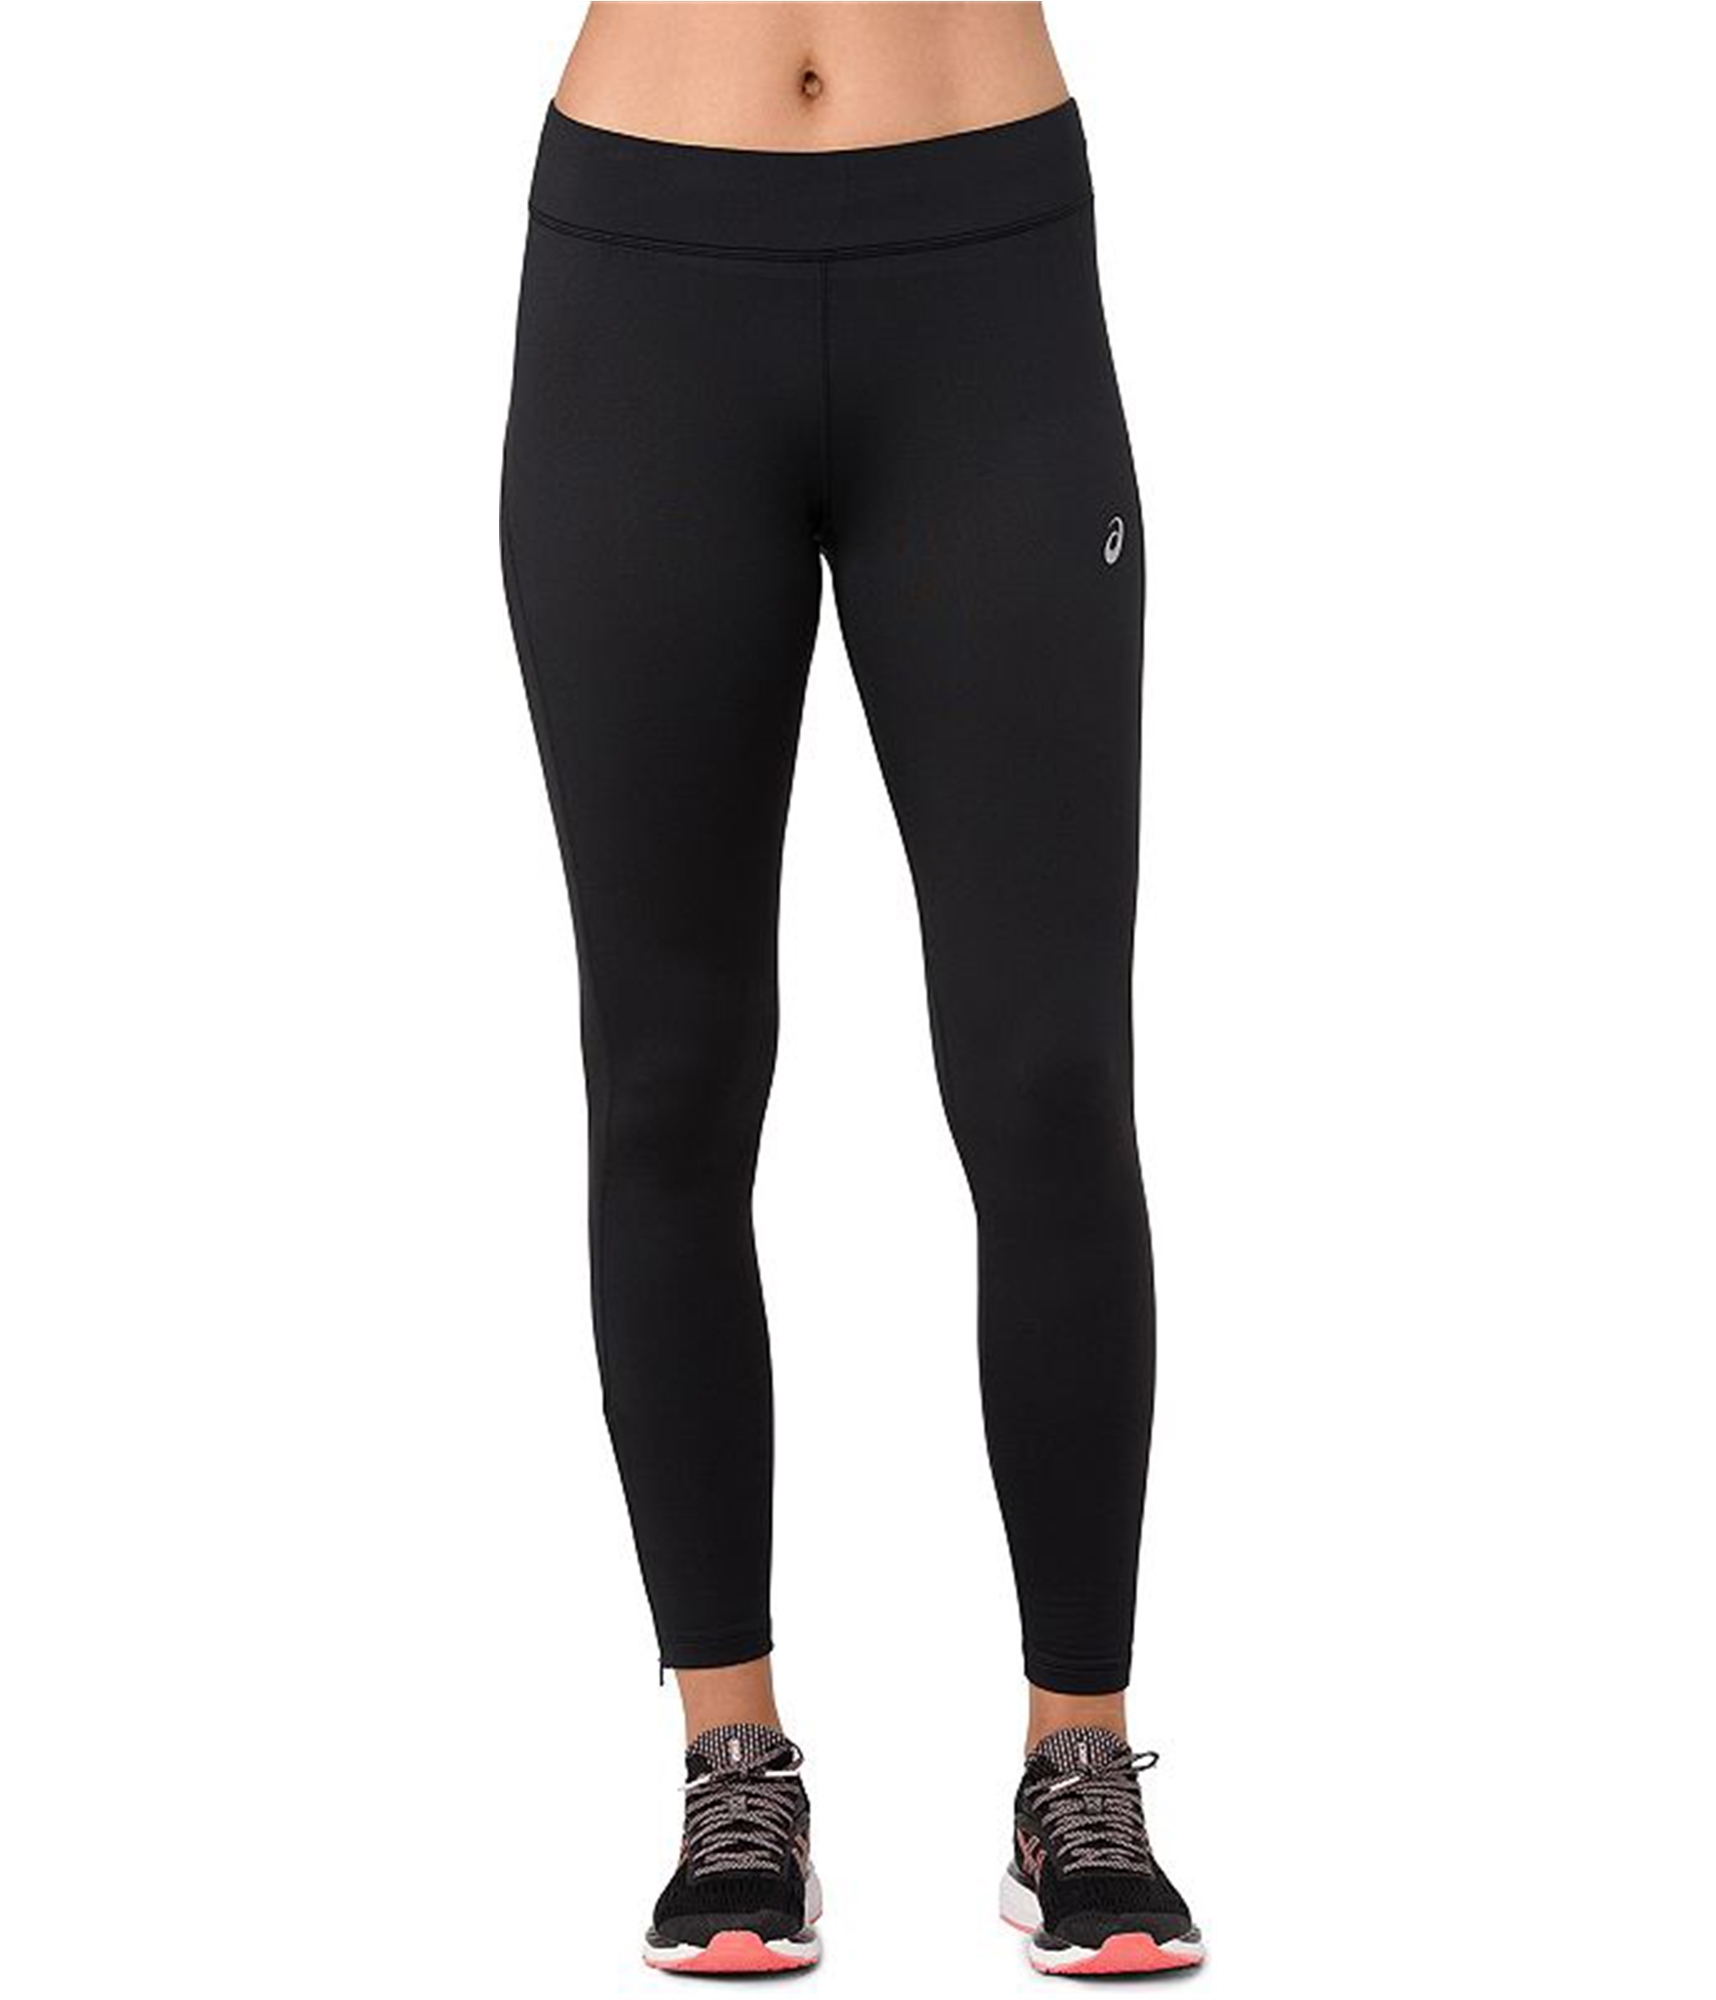 Buy a Womens ASICS Silver Winter Compression Athletic Pants Online   TagsWeeklycom